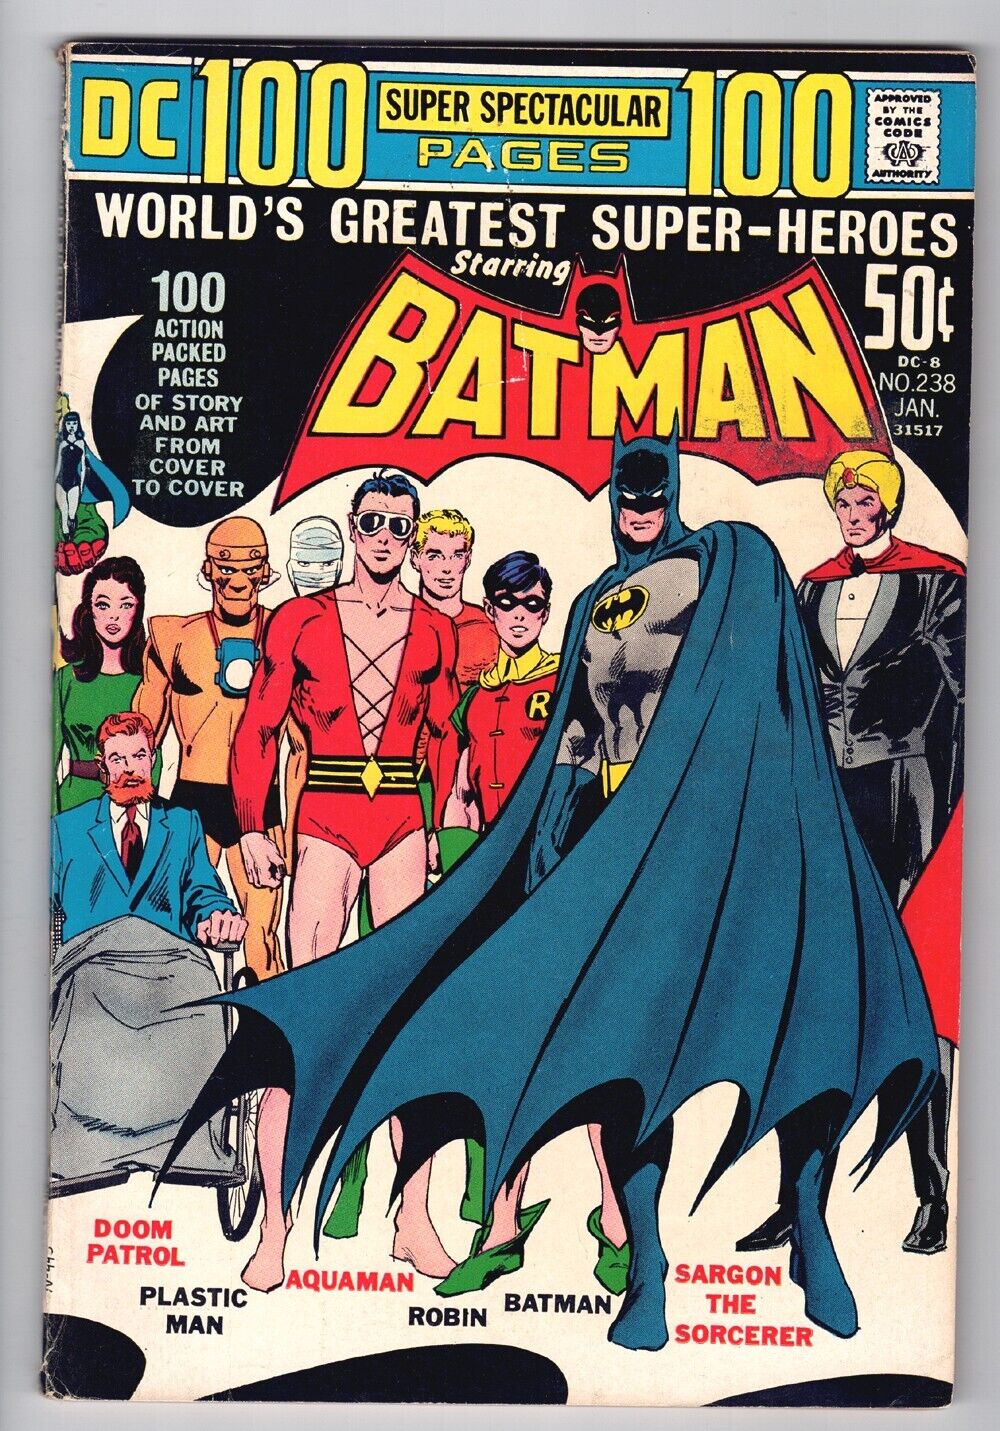 BATMAN #238 4.0 100 PAGE GIANT NEAL ADAMS COVER 1972 OFF-WHITE PAGES